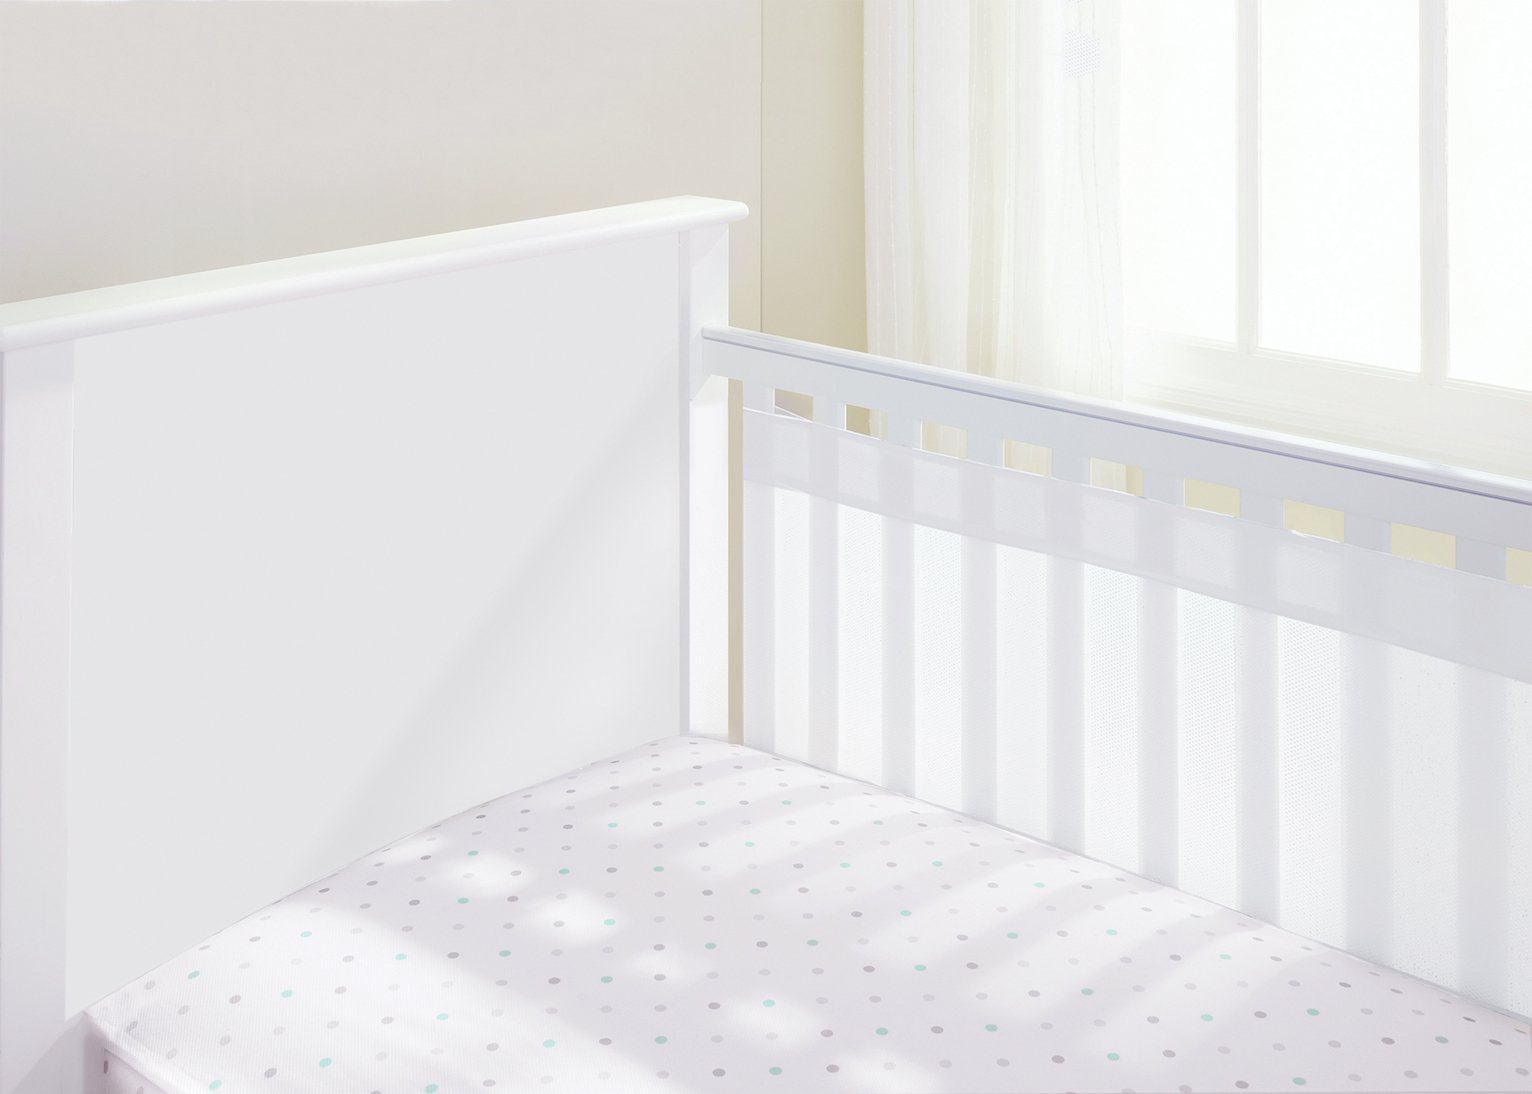 BreathableBaby 2 Sided Airflow Cot Liner - White